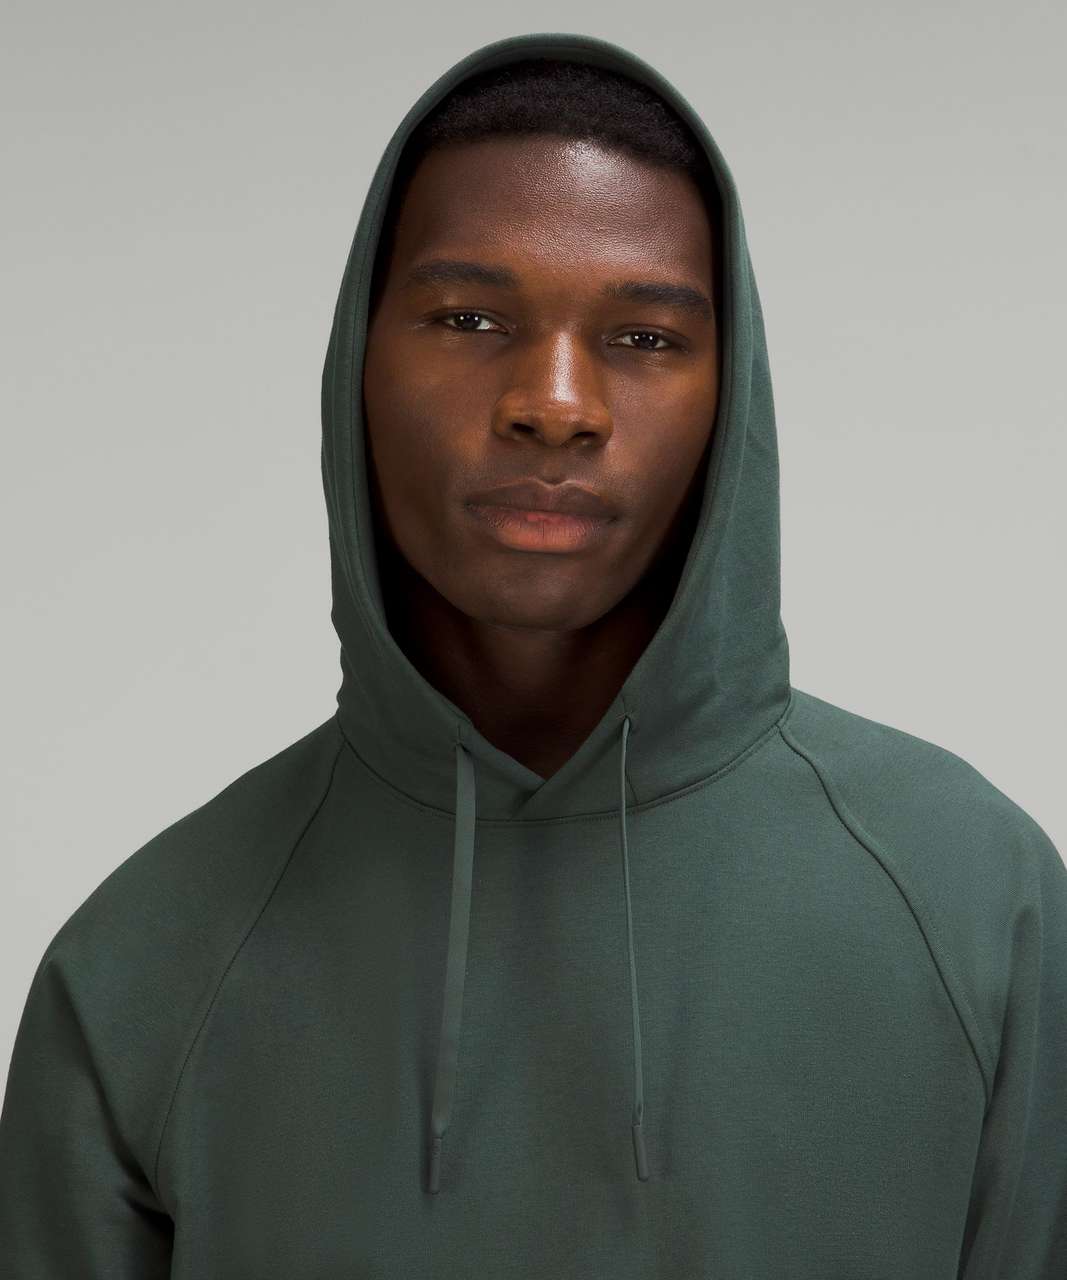 Lululemon City Sweat Pullover Hoodie French Terry - Smoked Spruce